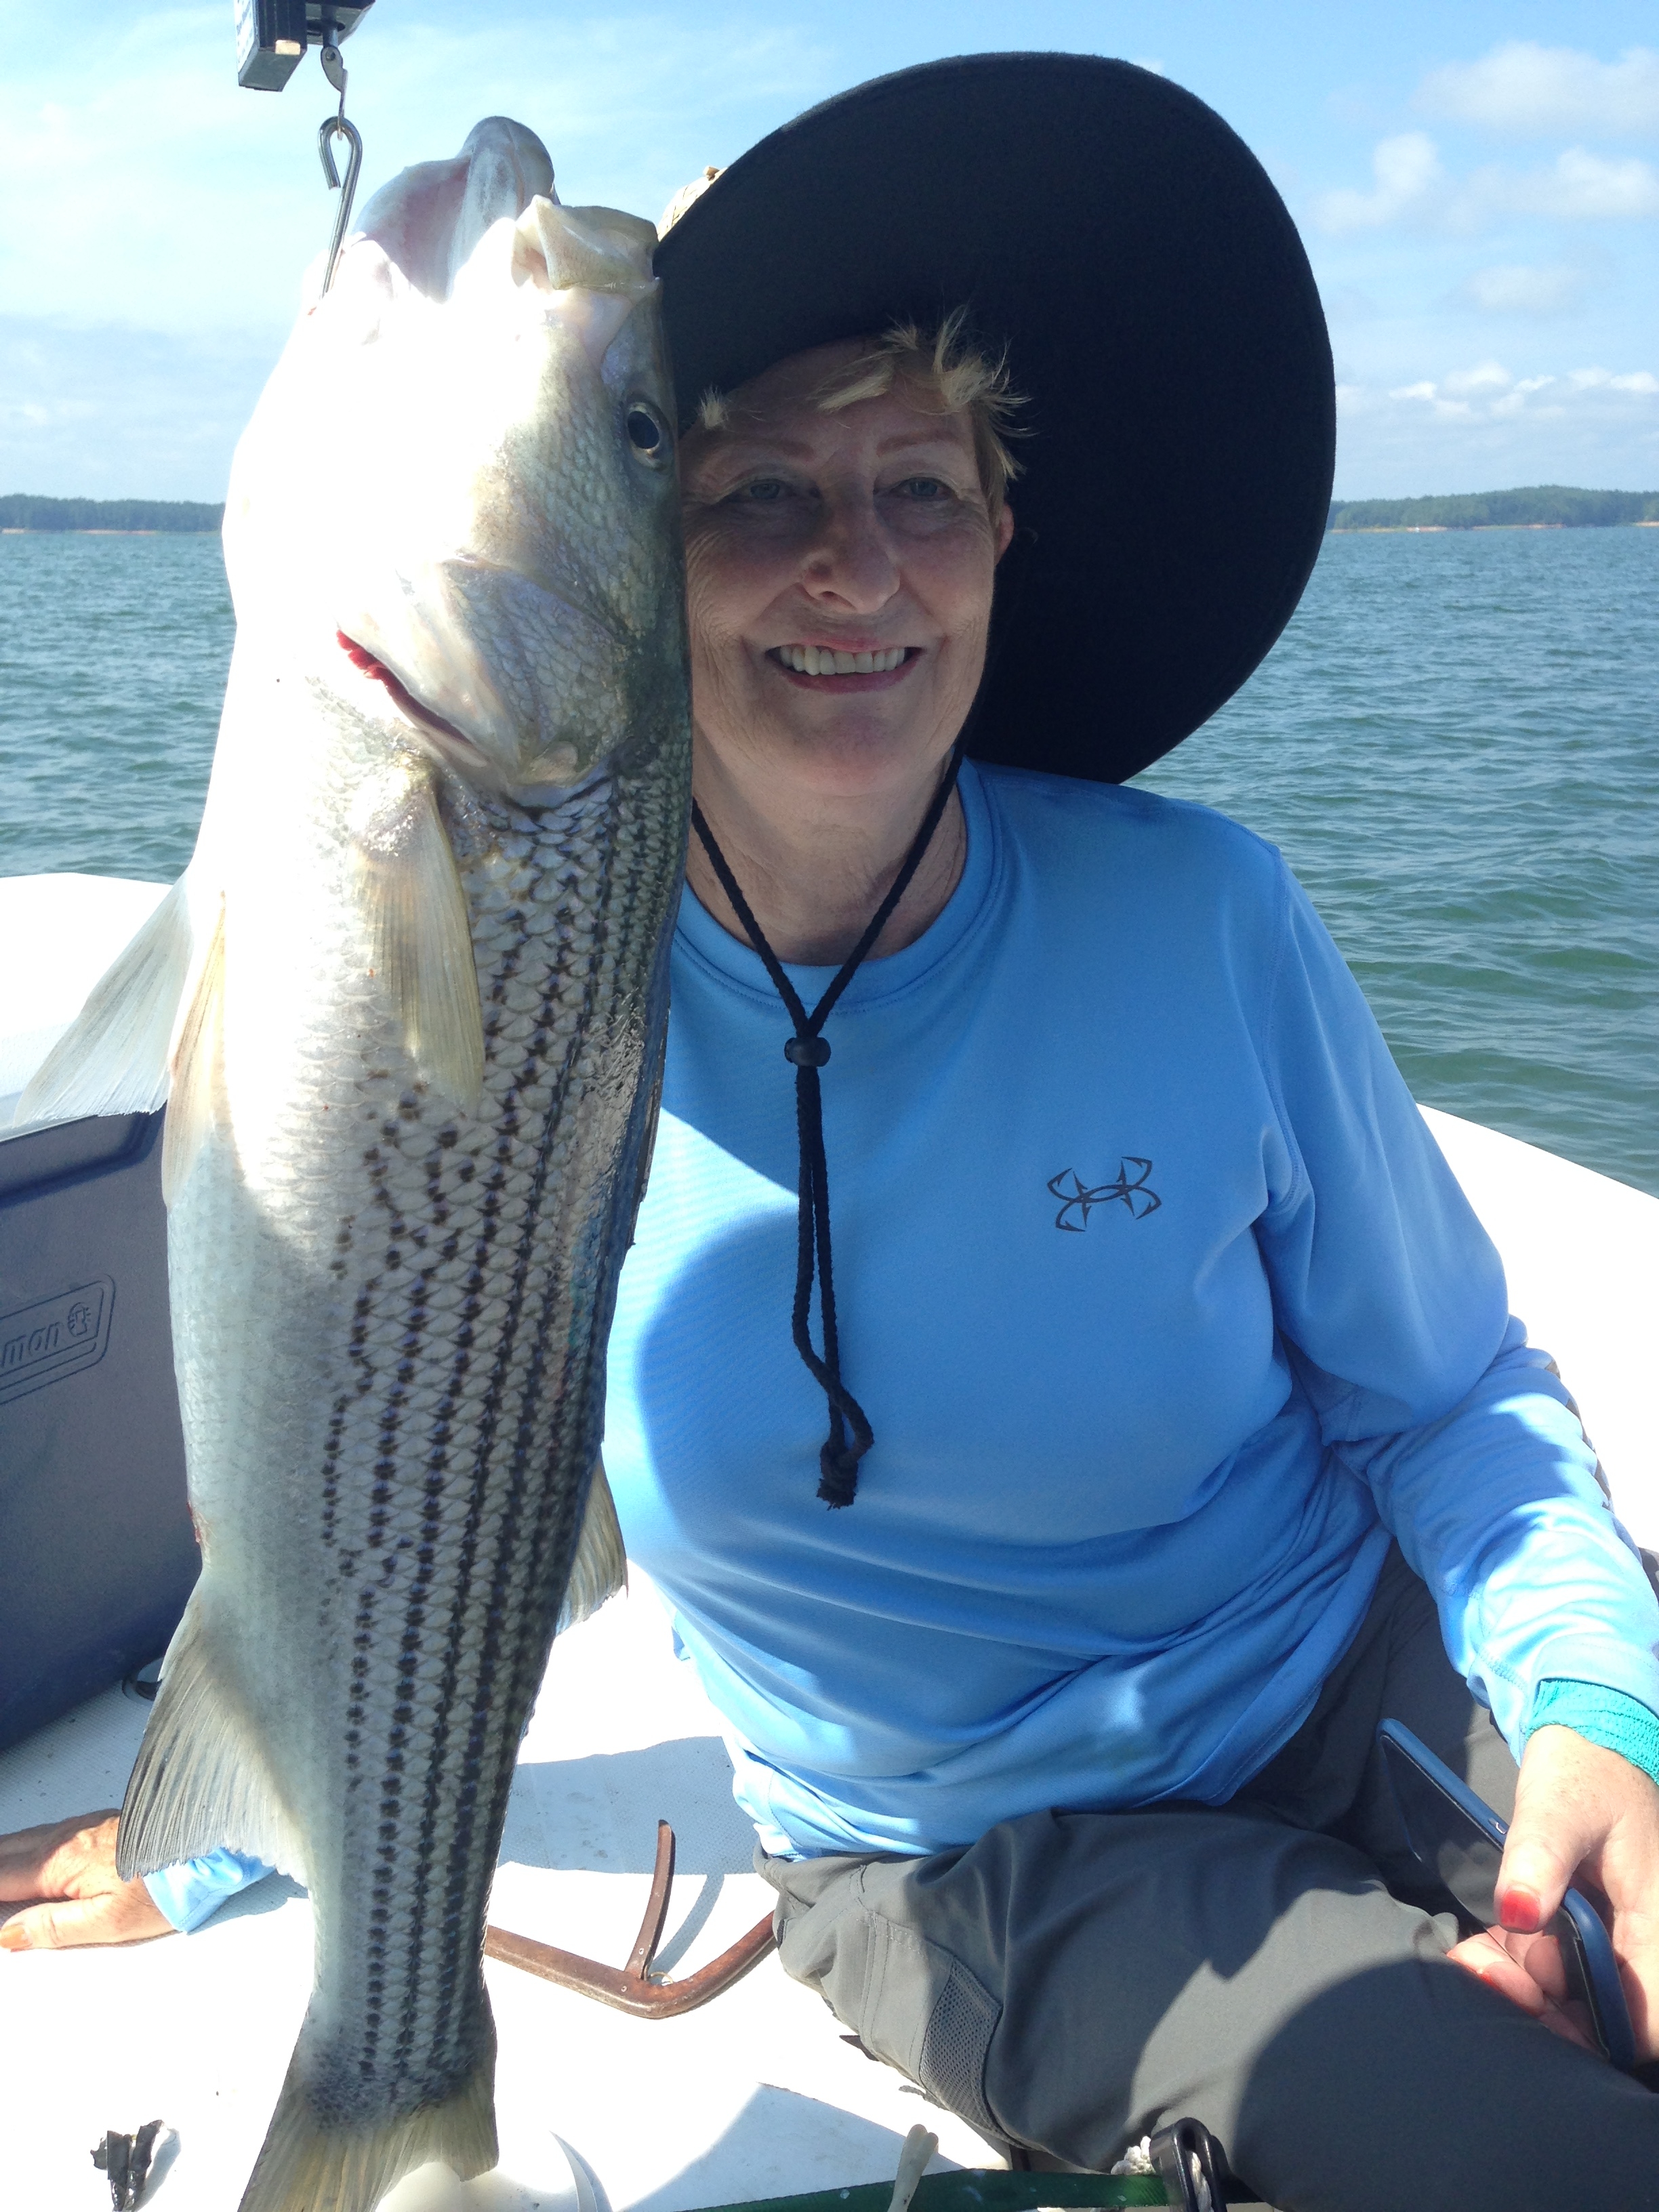 July 10, 2017 Cindy Gilley frrom Sycamore, Ga. with her 9 pound striper.